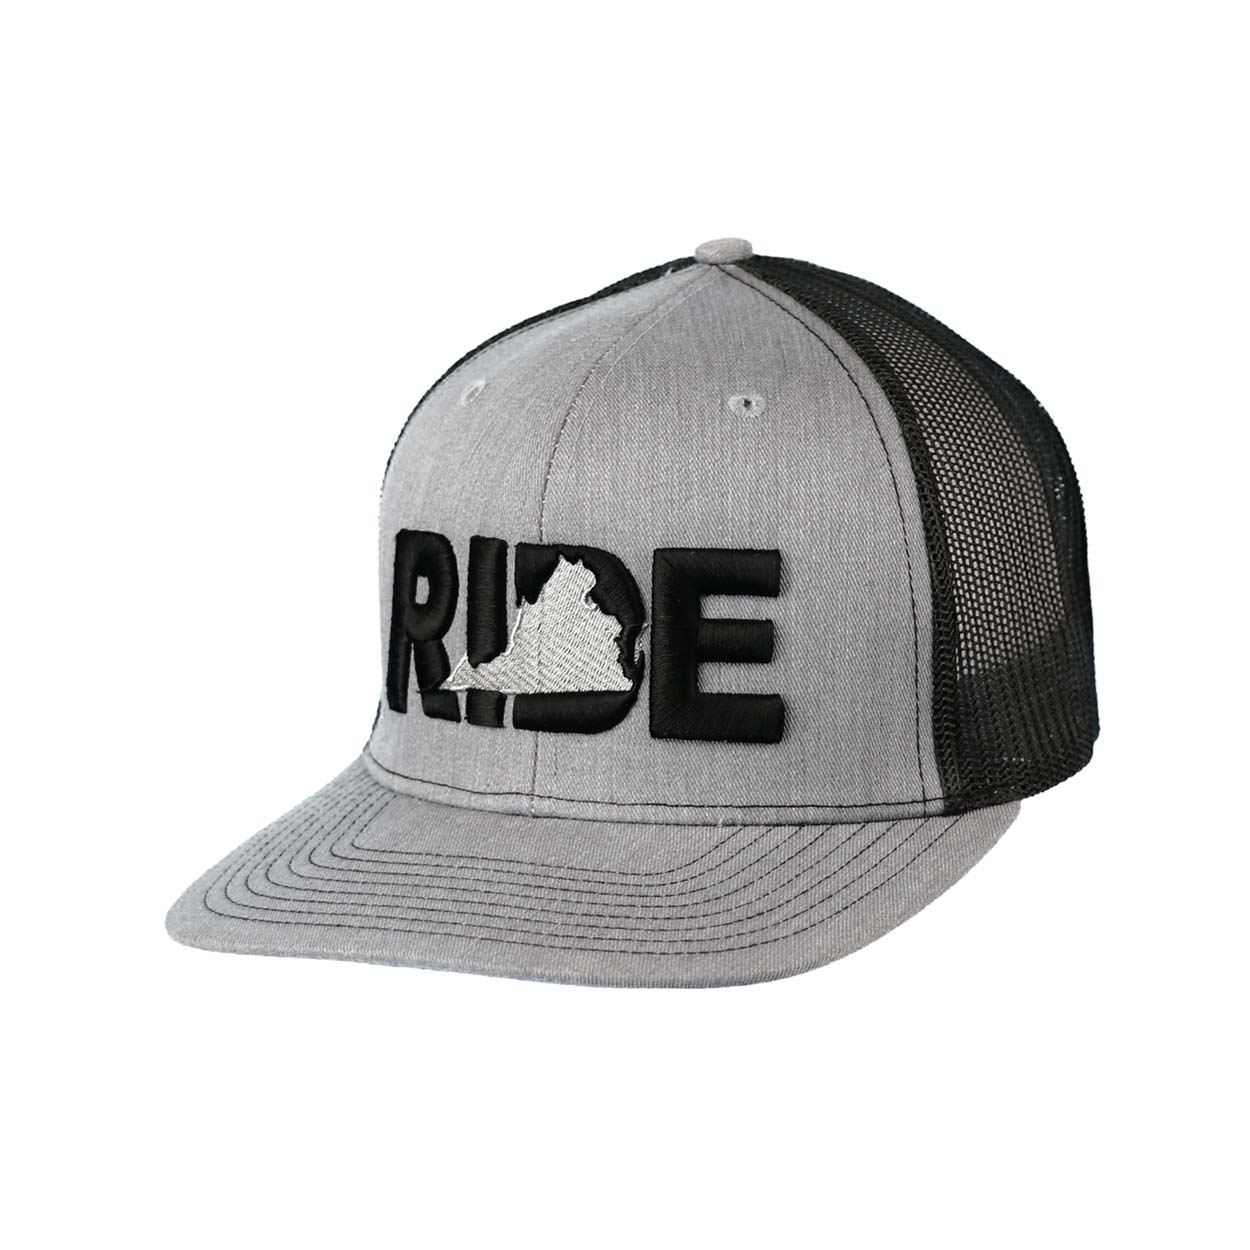 Ride Virginia Classic Pro 3D Puff Embroidered Snapback Trucker Hat Heather Gray/Black